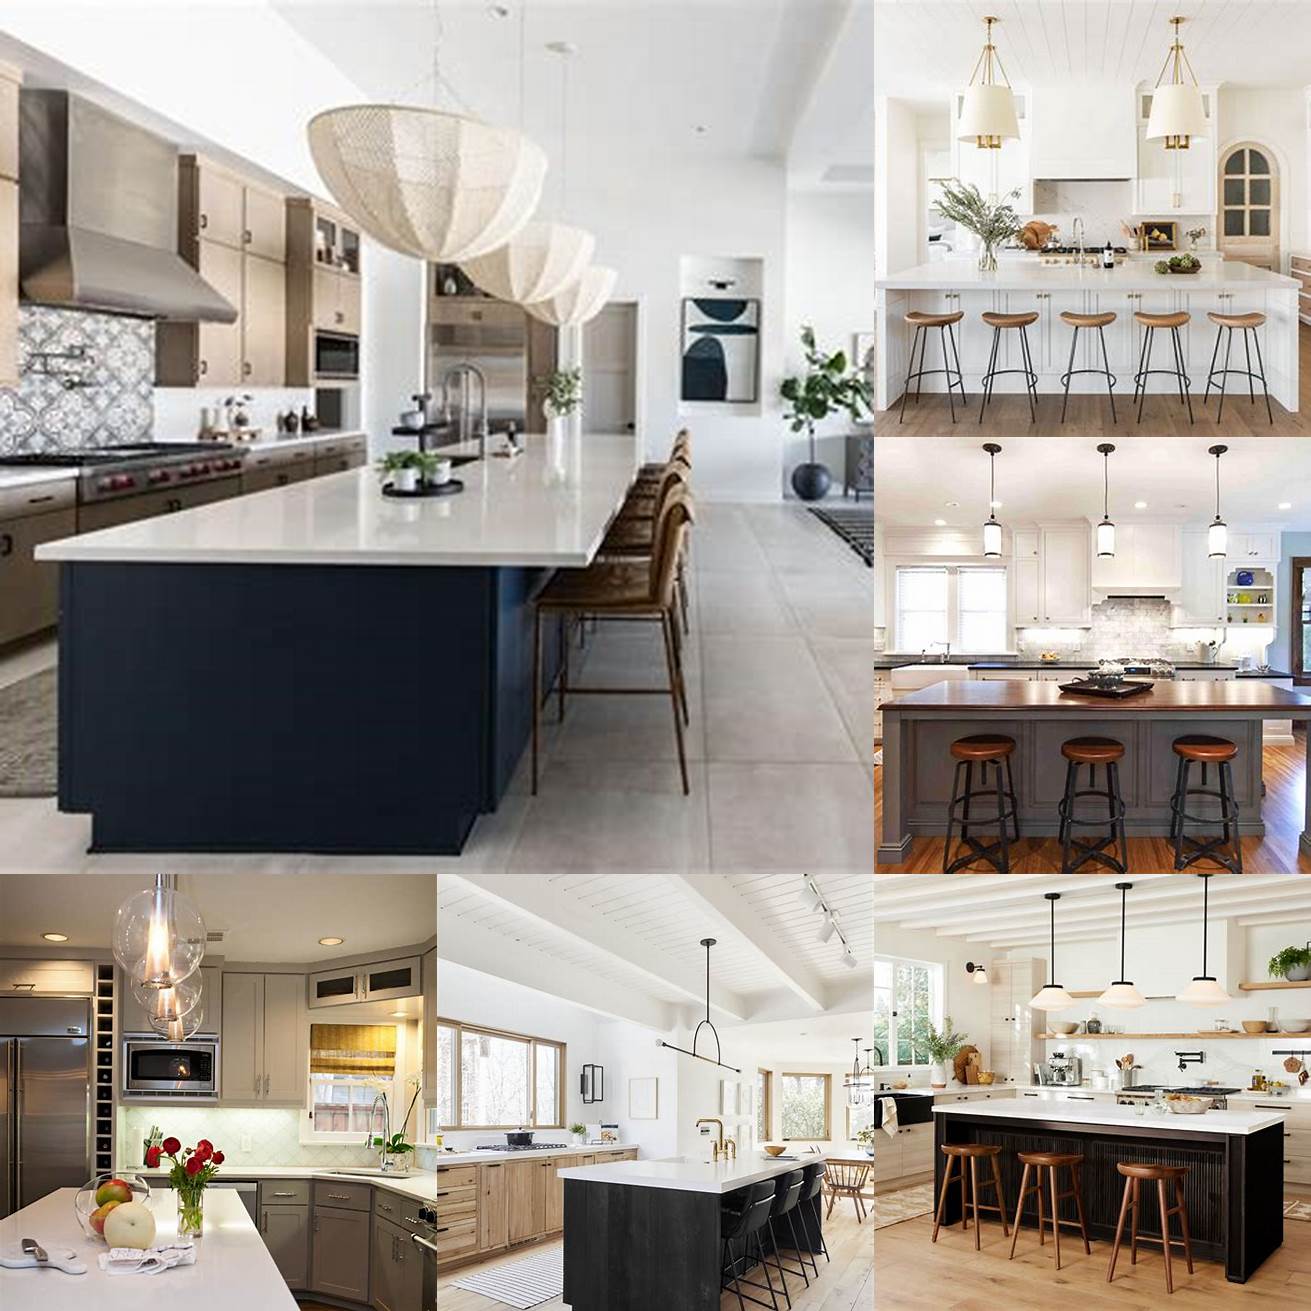 1 A white and bright open concept kitchen with a statement pendant light over the island